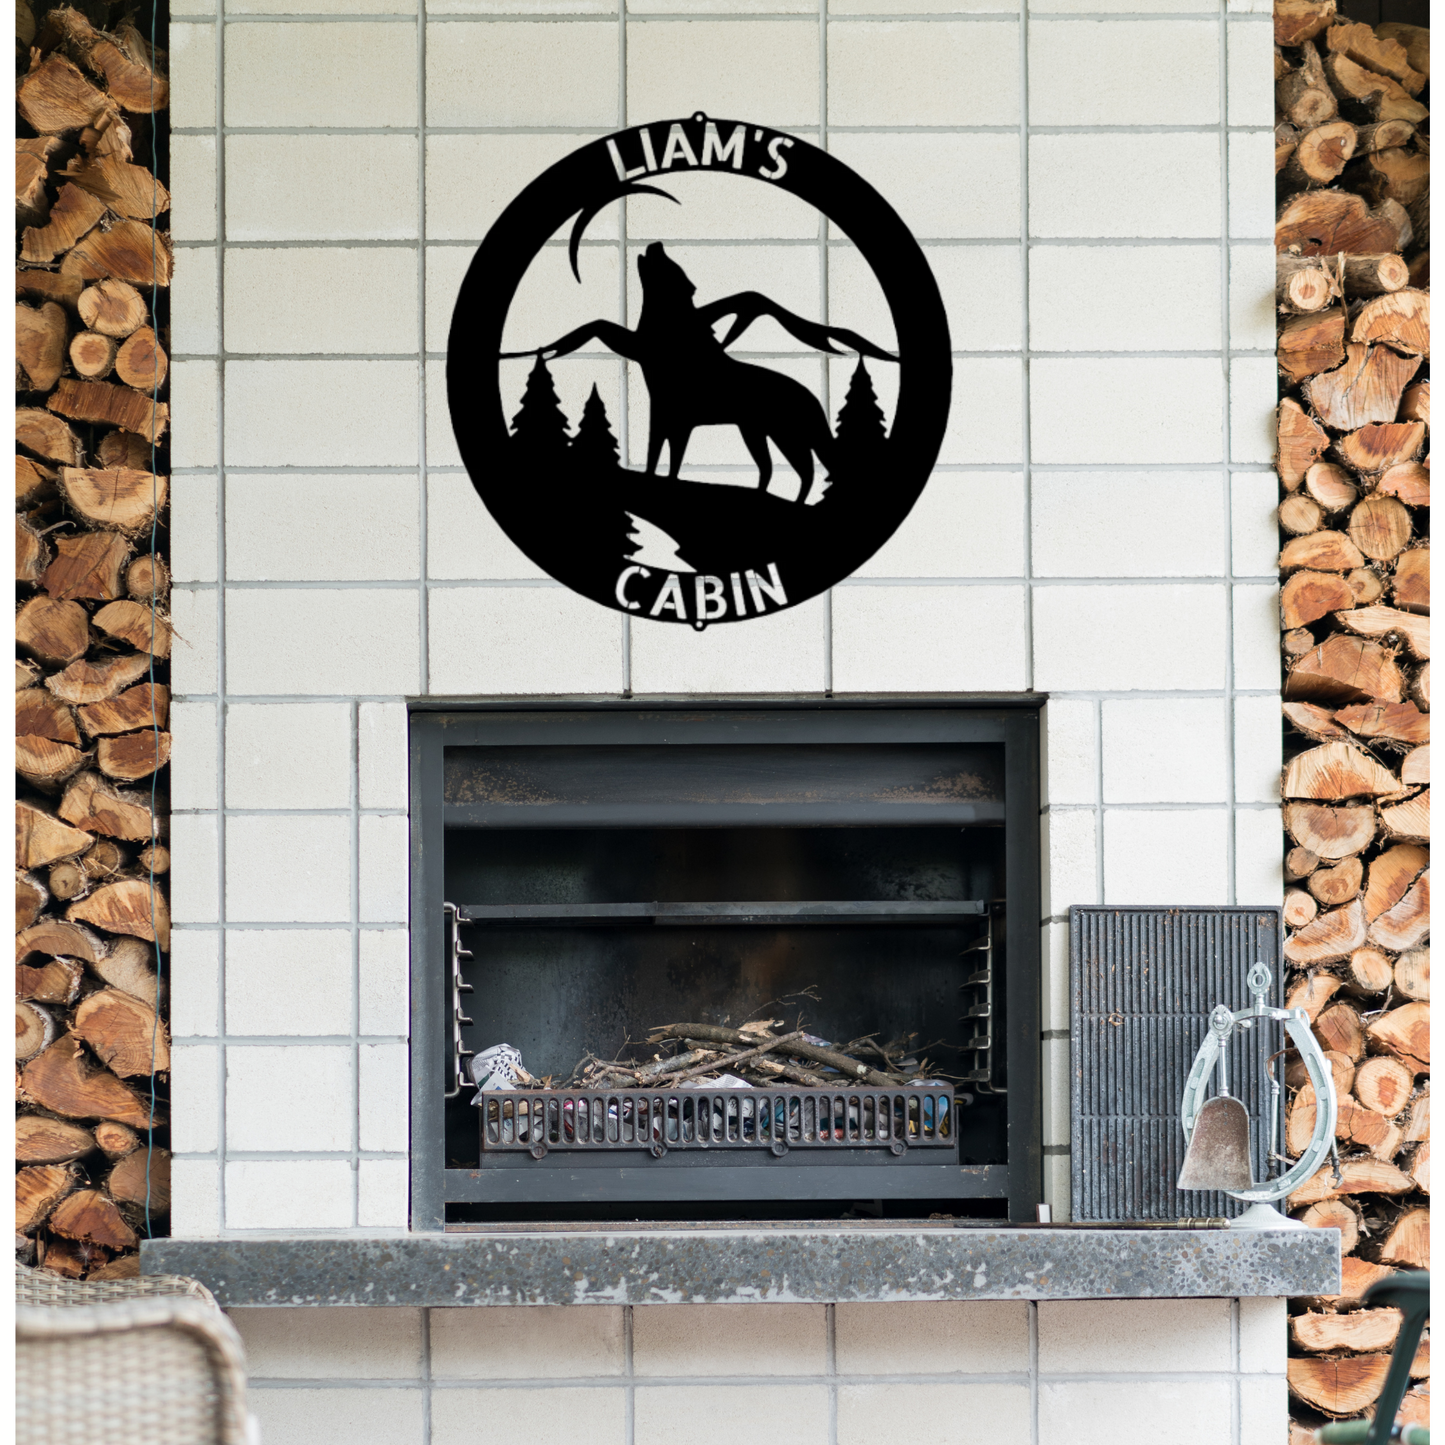 Personalized Mountain Metal Sign, Metal Address Sign, Howling Wolf Metal Wall Art, For Cabin, Lodge or Lake House